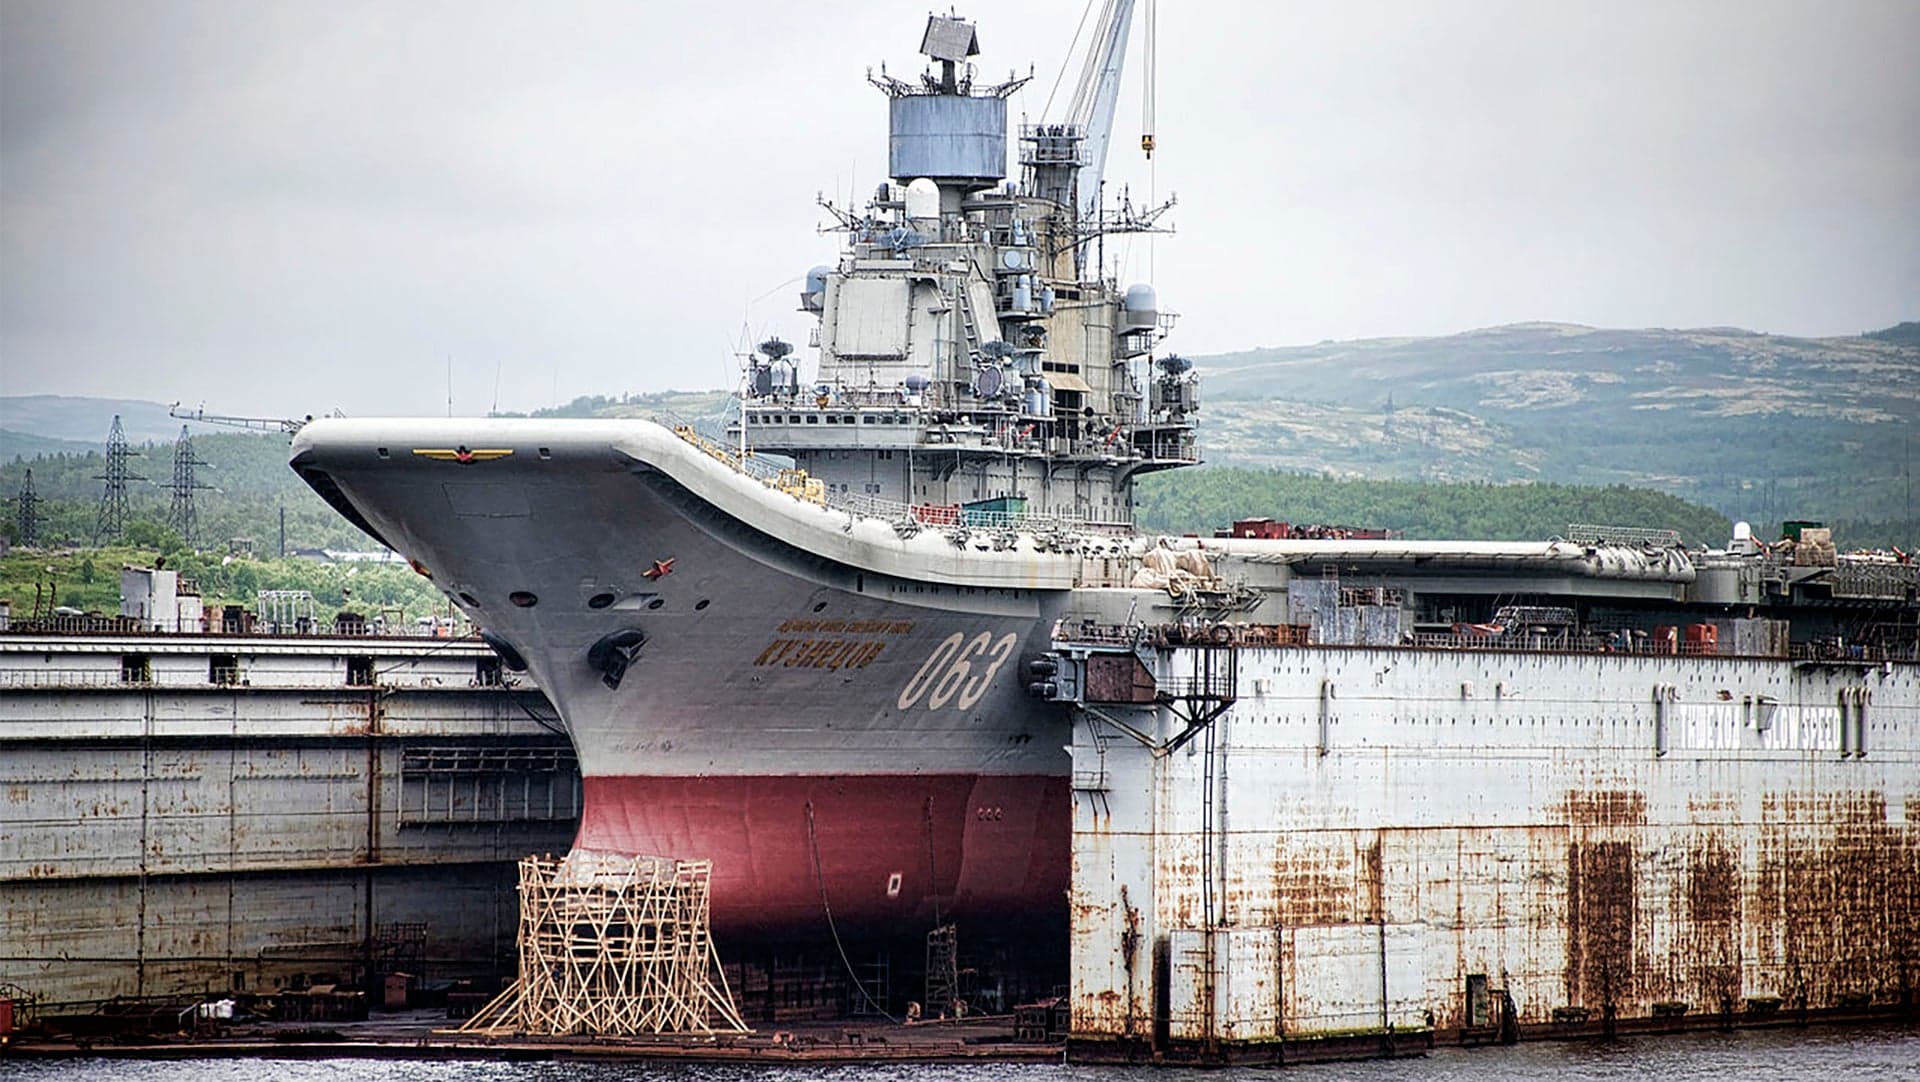 Huge Floating Dry Dock Holding Russia’s Only Aircraft Carrier Has Accidentally Sunk (Updated)